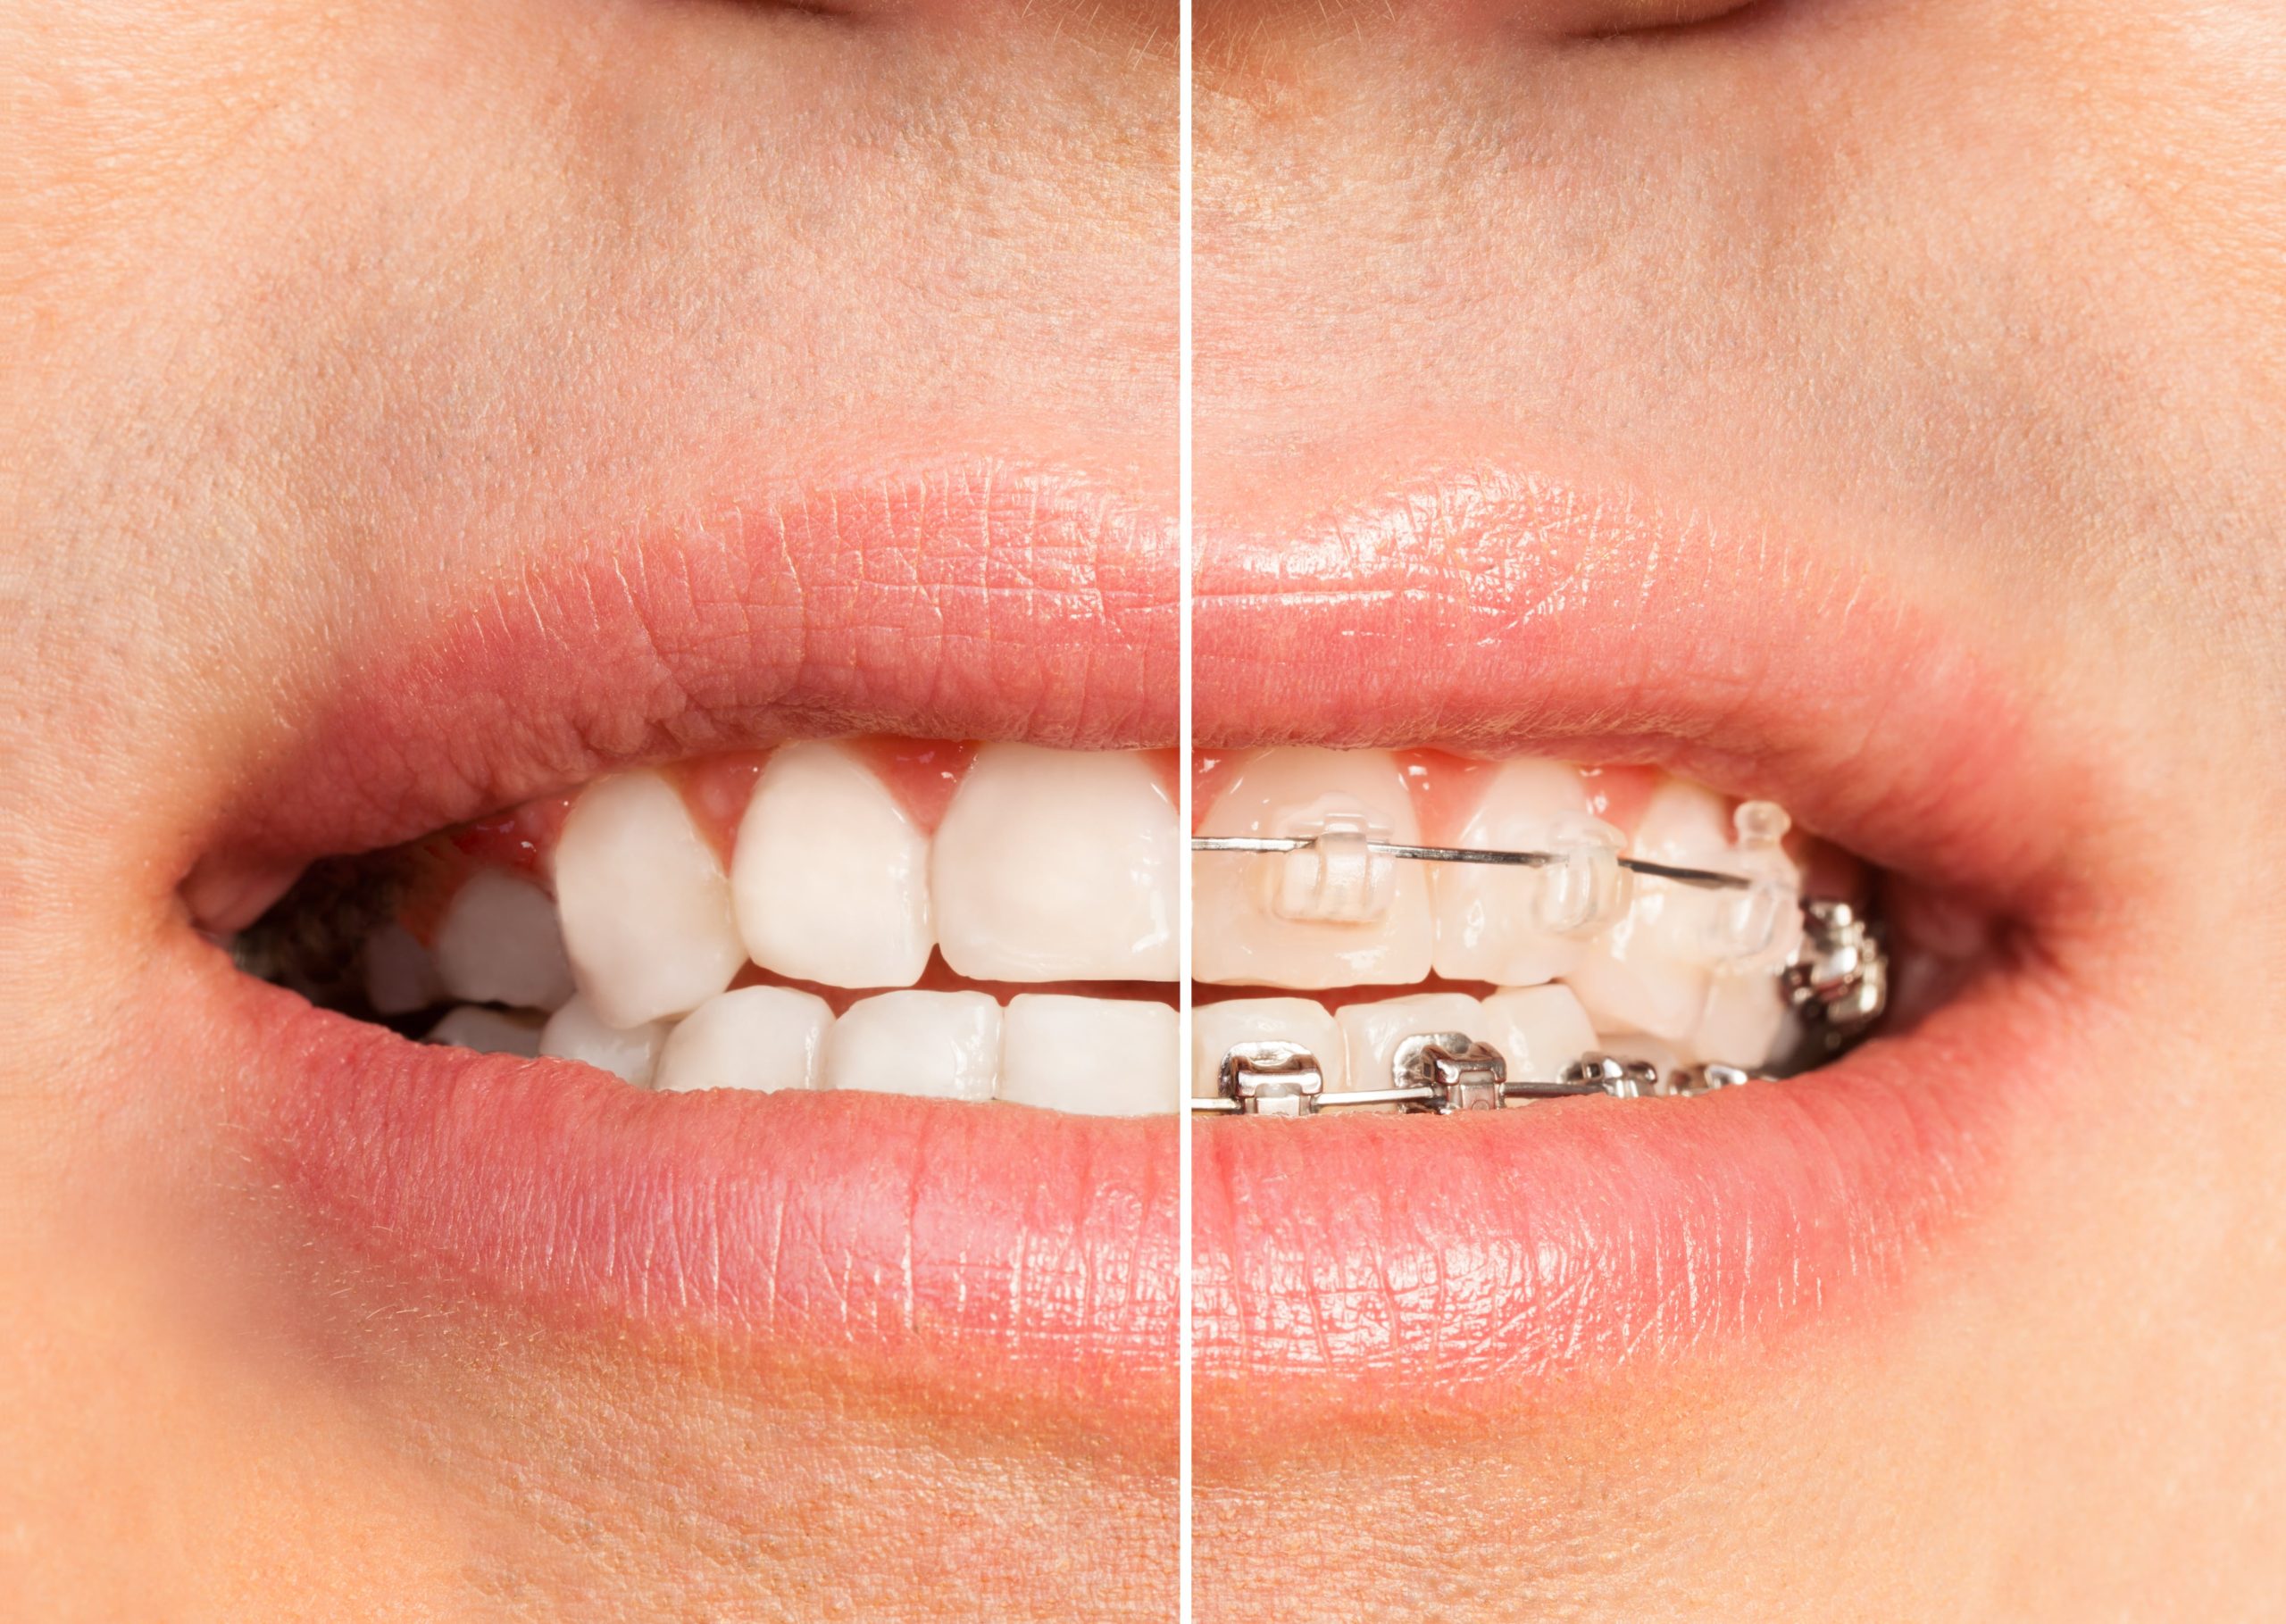 Lingual Braces Vs. Invisalign® – which one is right for me